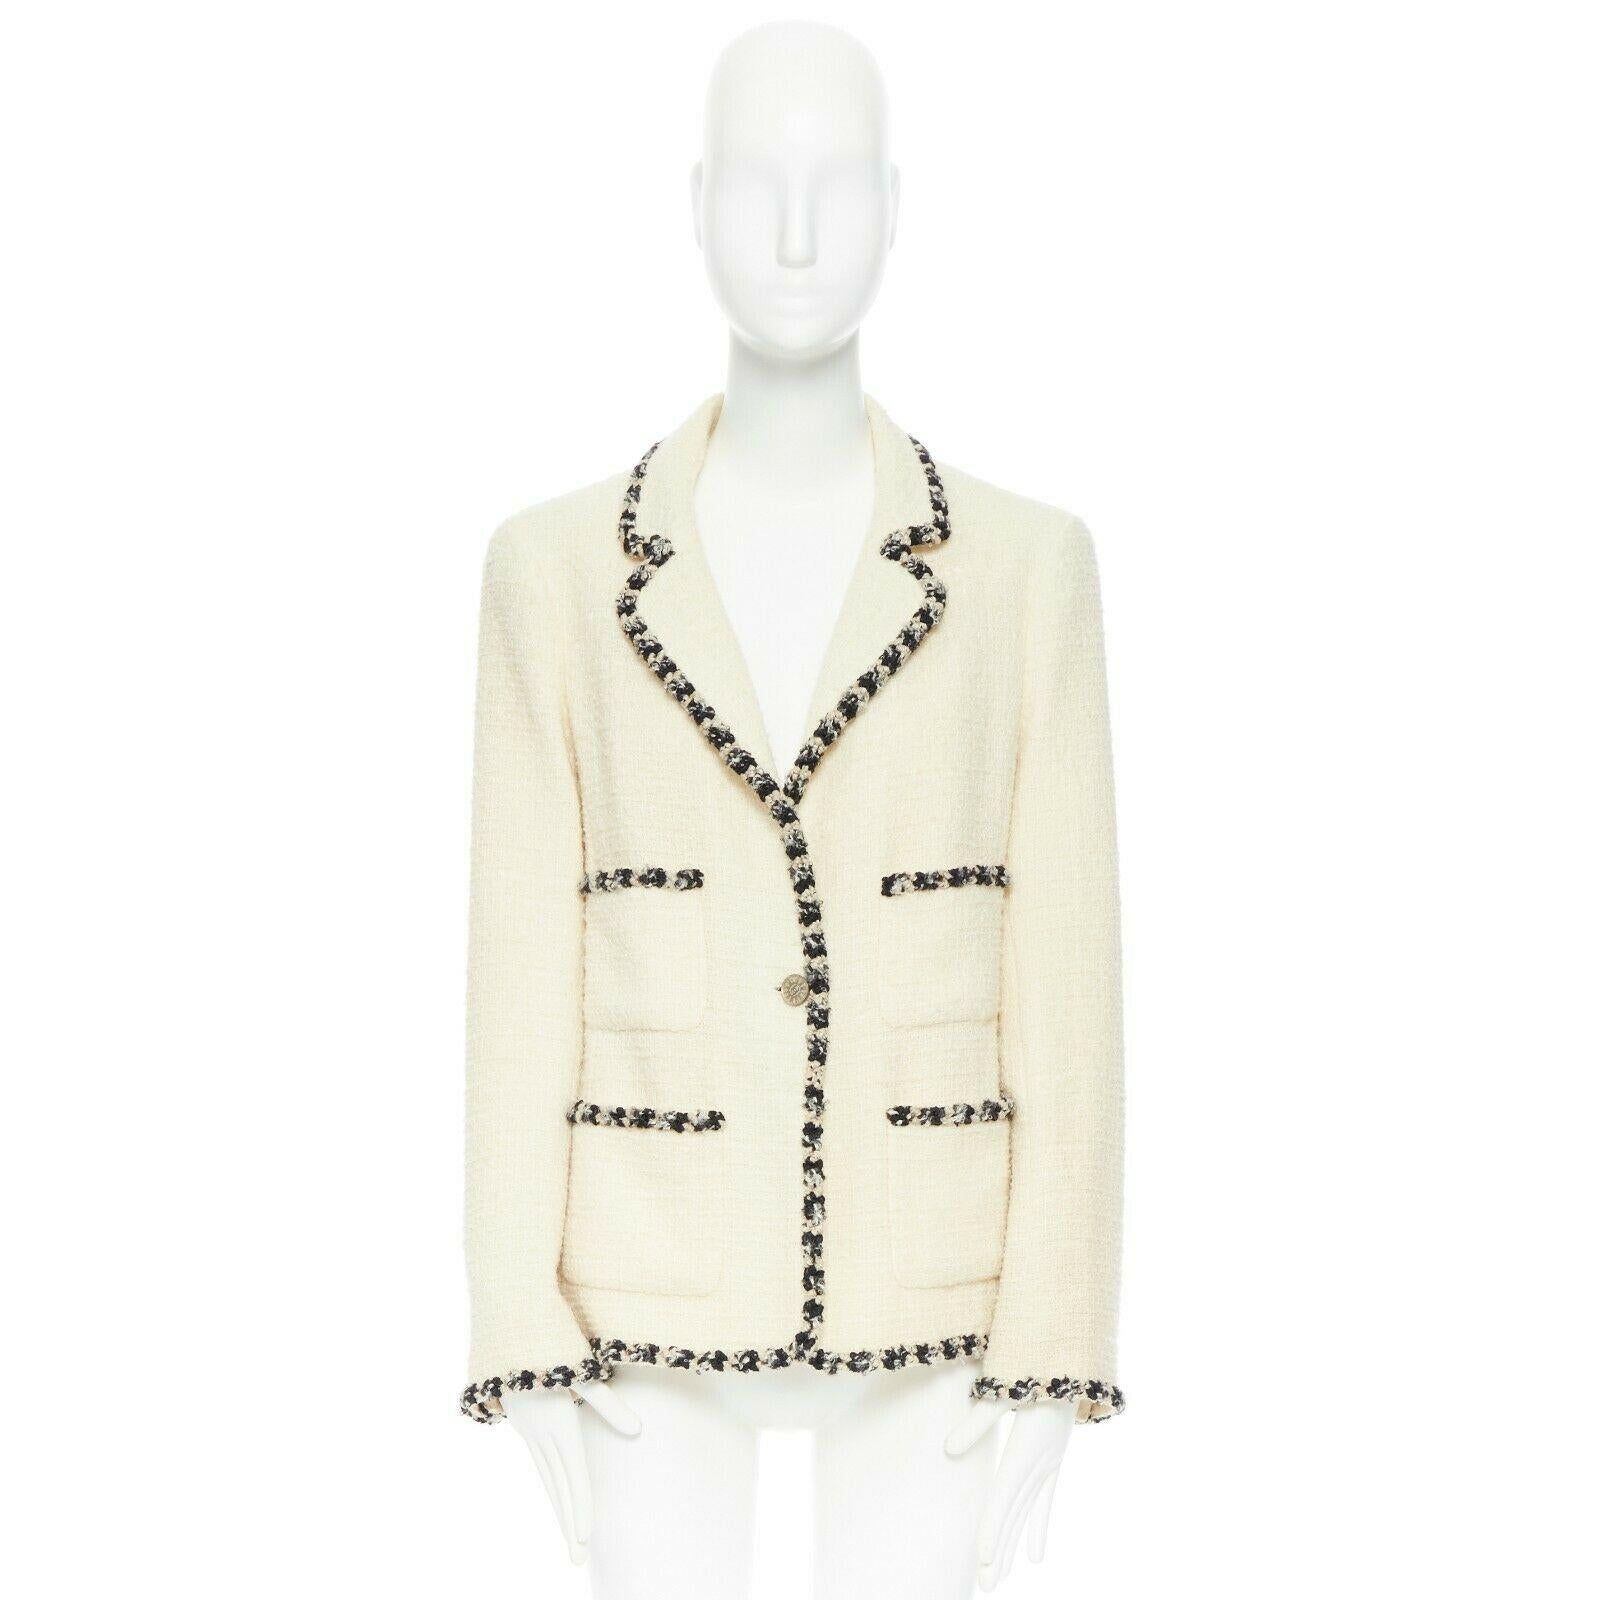 runway CHANEL 06A cream tweed black trim lapel 4 pocket school boy jacket FR46
Brand: CHANEL
Designer: Karl Lagerfeld
Collection: 06A
Model Name / Style: Tweed jacket
Material: Wool blend
Color: Ecru
Pattern: Solid
Closure: Button
Lining material: